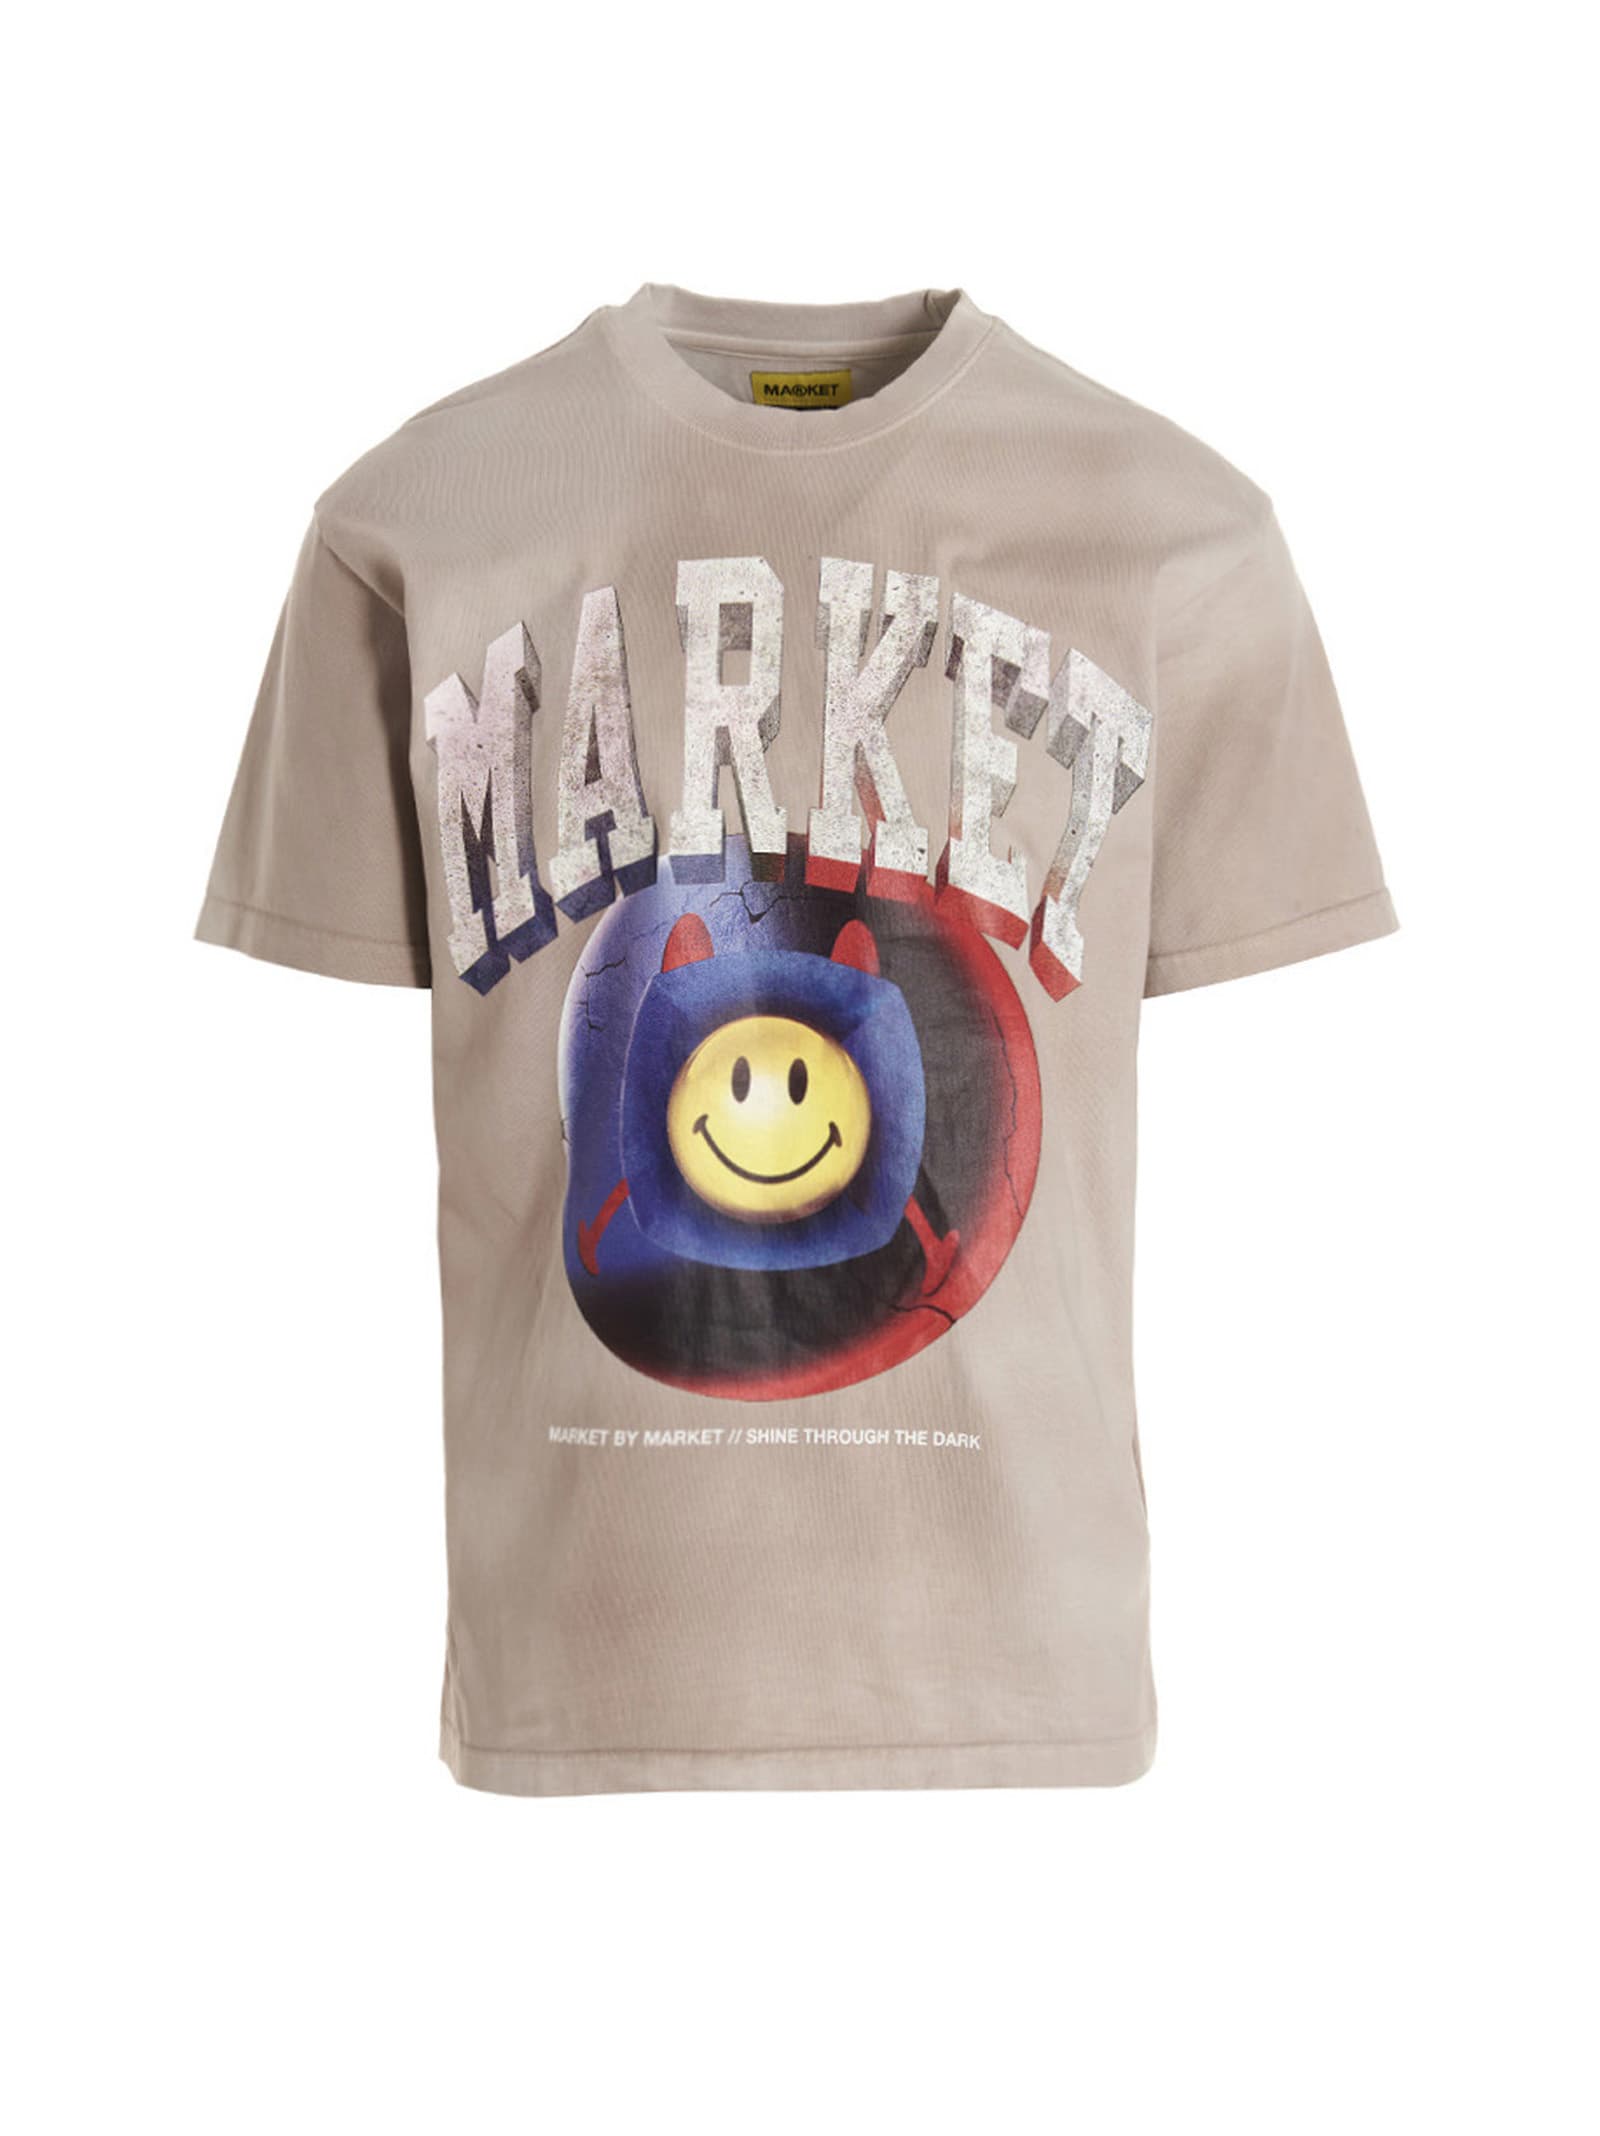 MARKET T-SHIRT SMILEY HAPPINESS